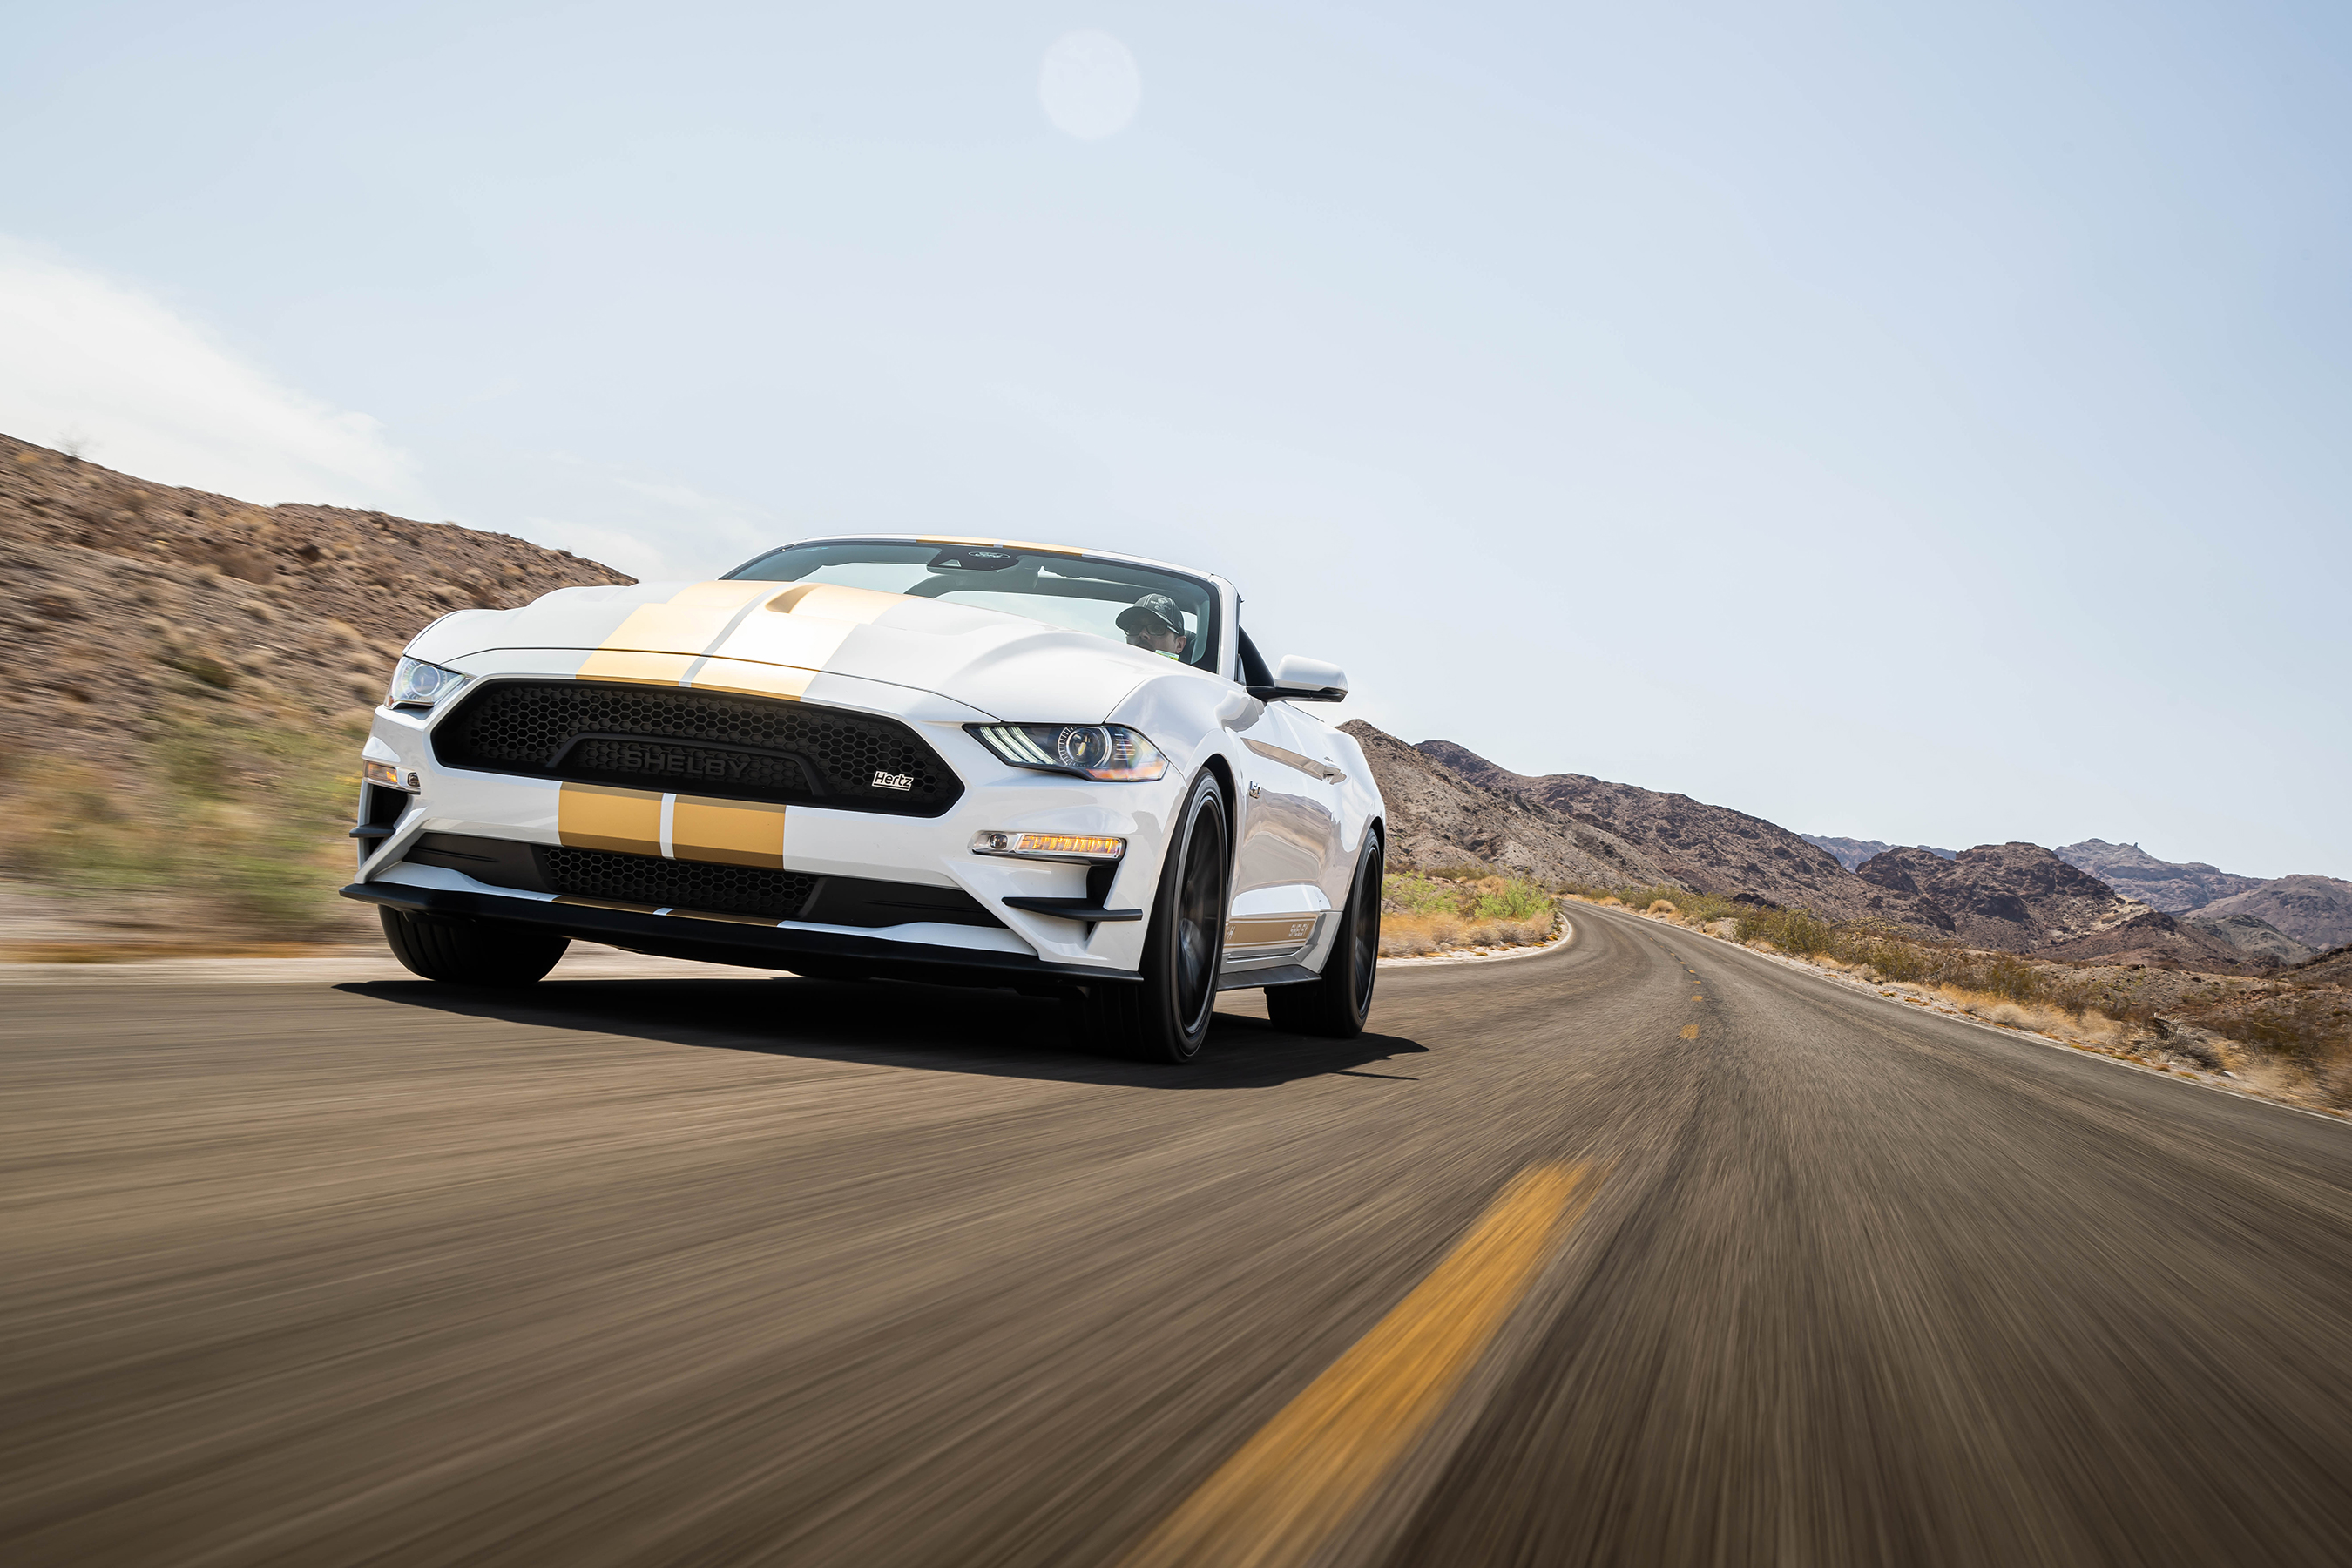 The Mustang Shelby GT-H uses 20-inch aluminum alloy wheels and also features a unique deep-draw Shelby-designed hood, top grille, winglet fascia and taillight panels.